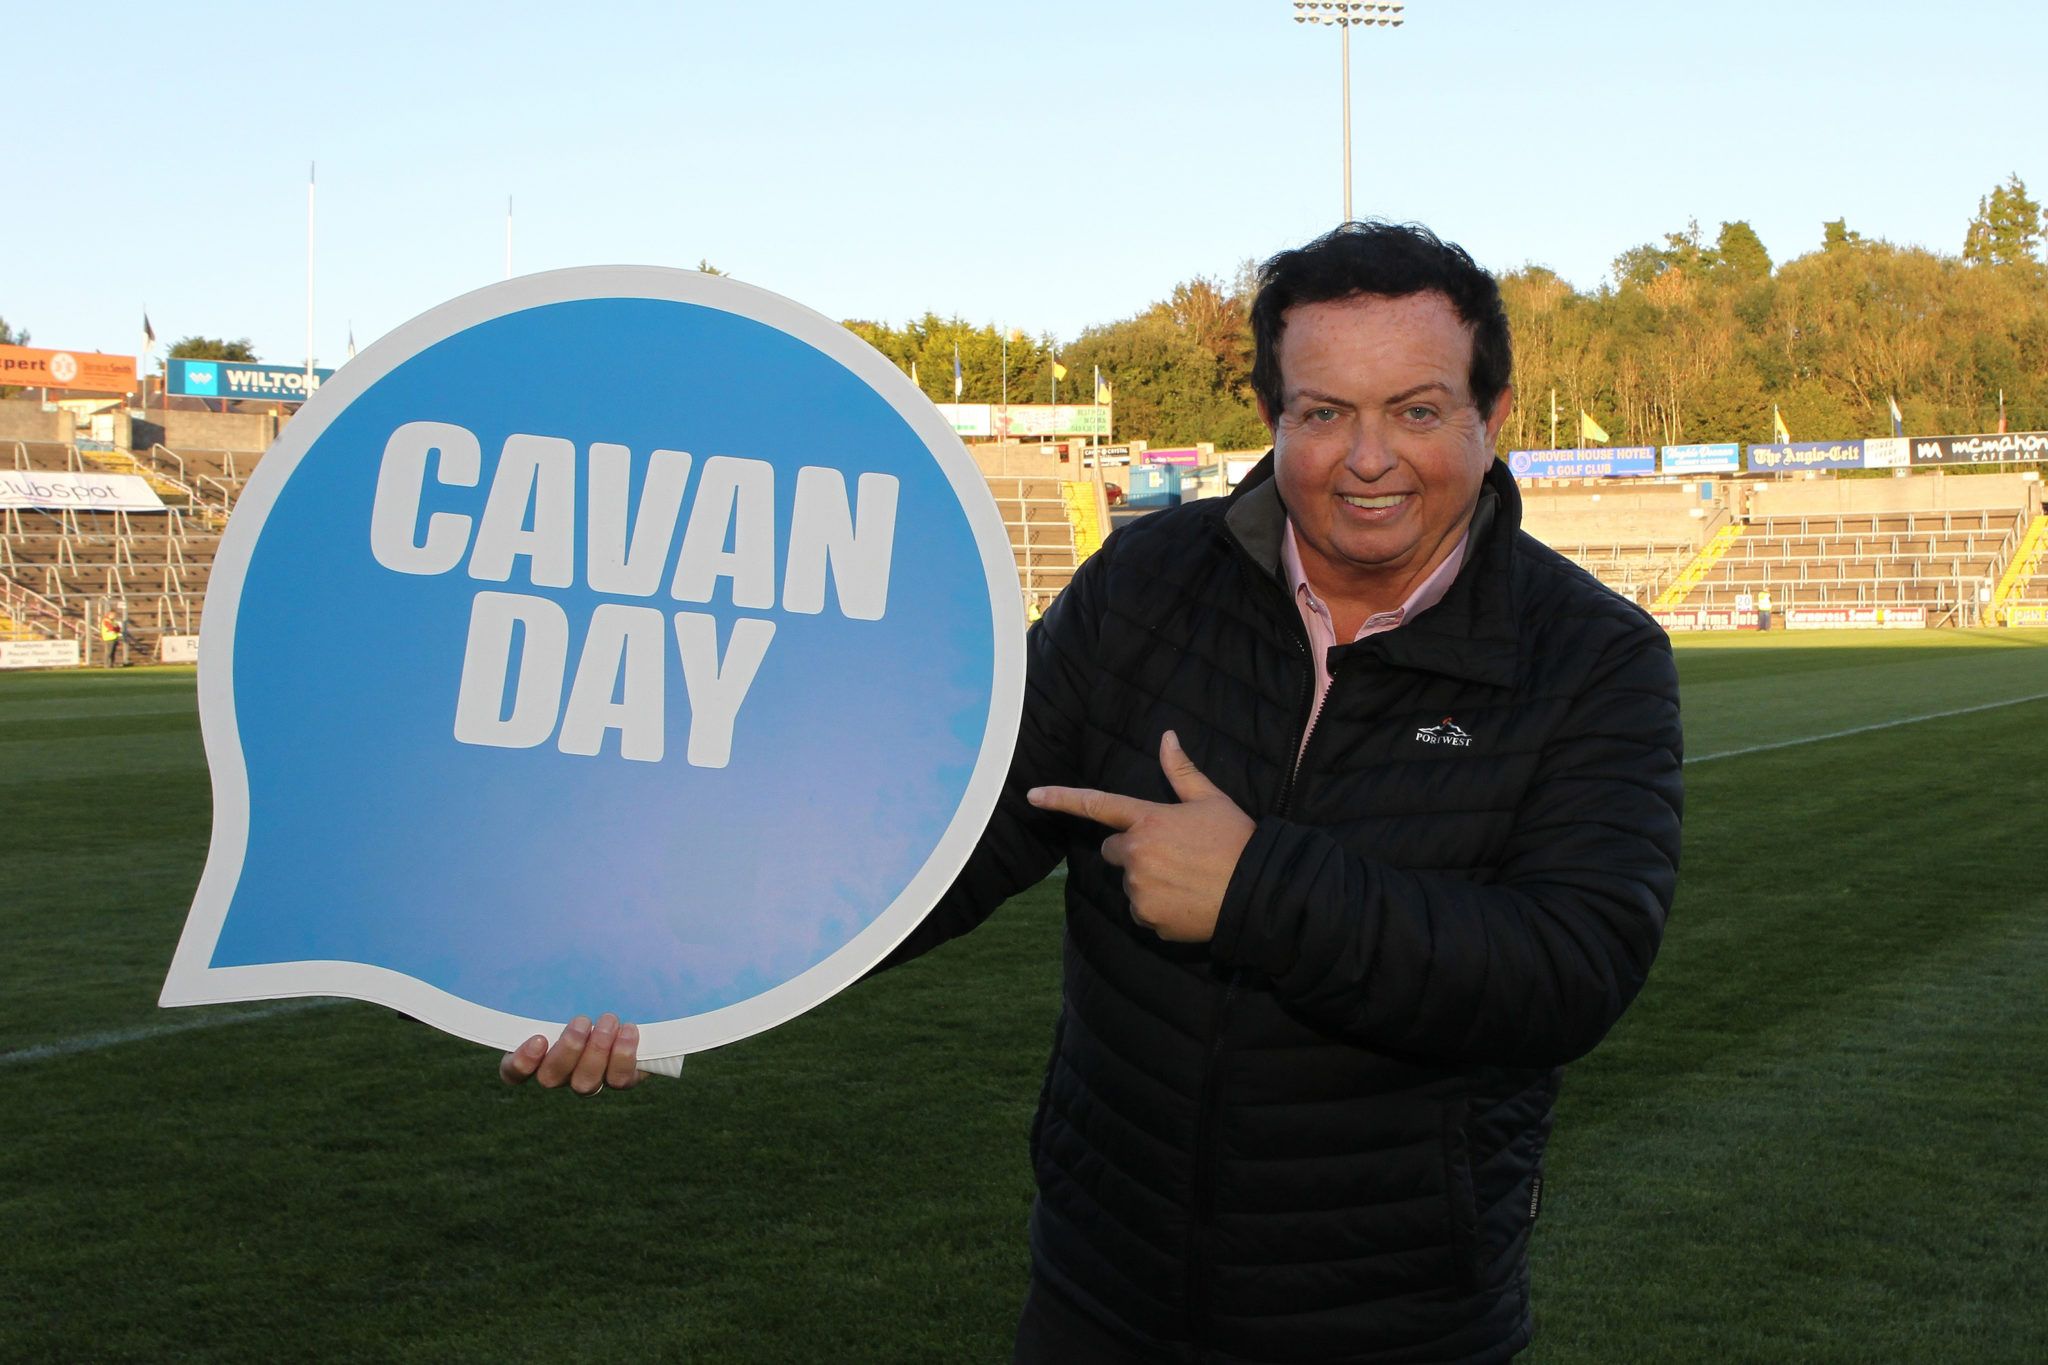 Share your love for the Breffni County with Cavan Day next month!